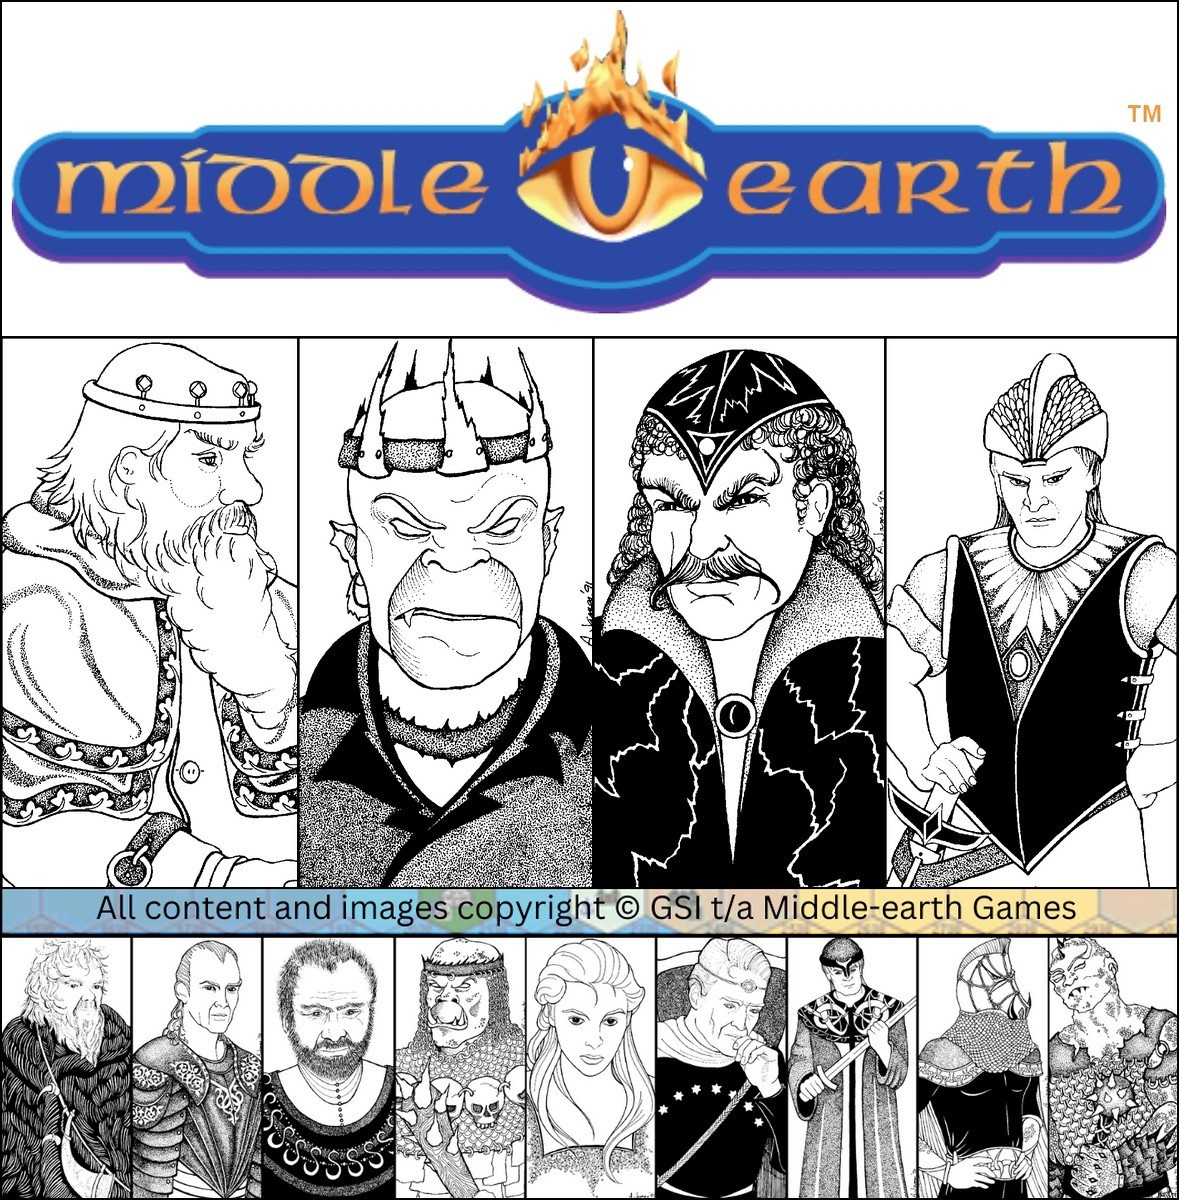 Middle-earth PBM image ad for Middle-earth Games